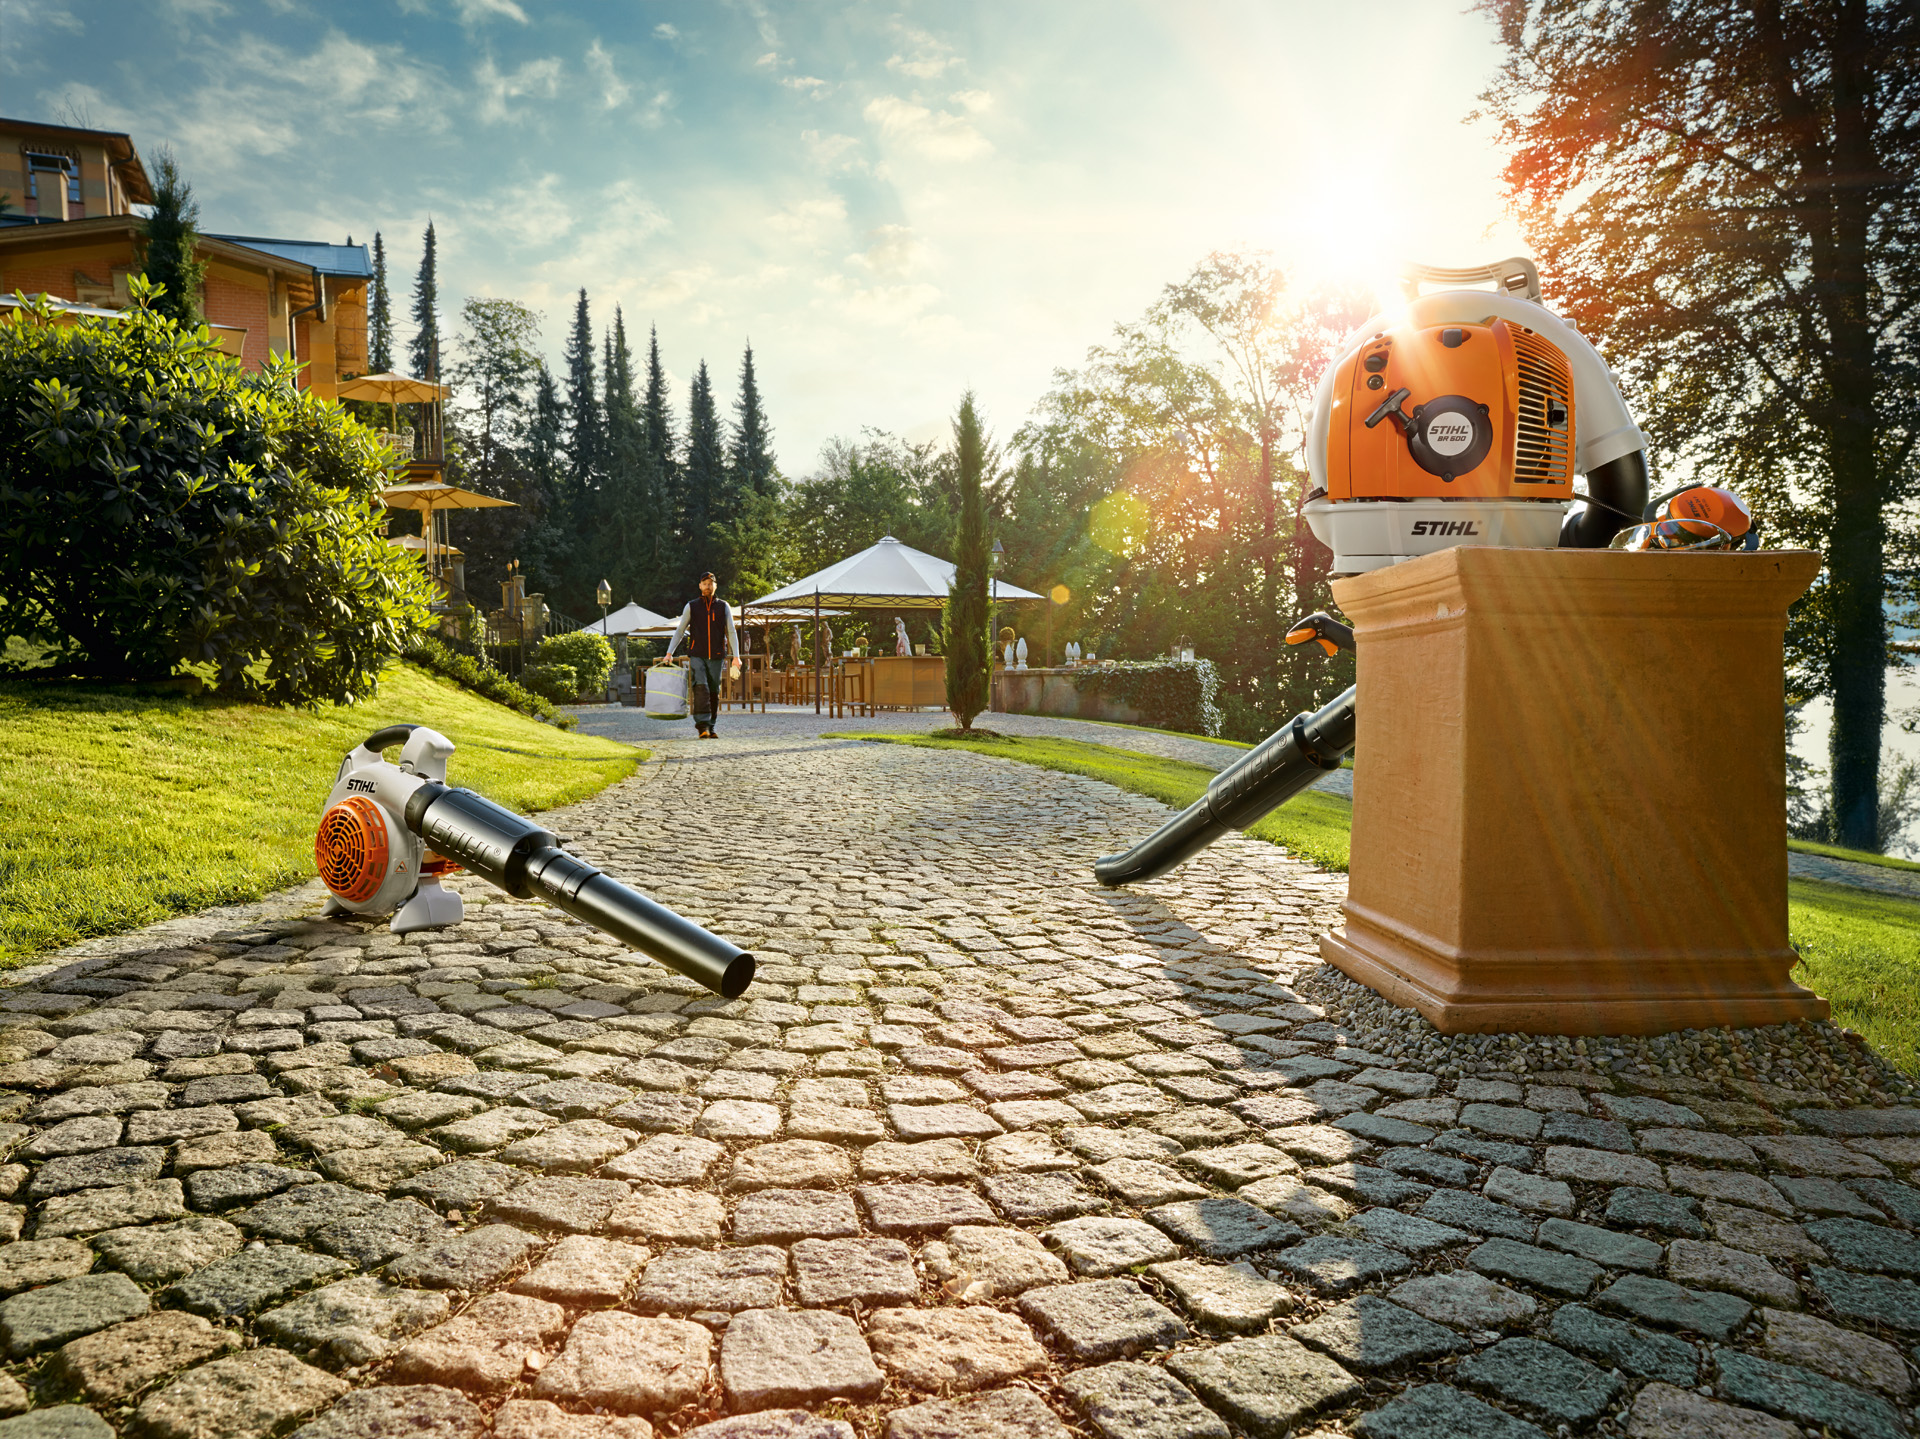 Stihl Leaf Blowers - What you need to know